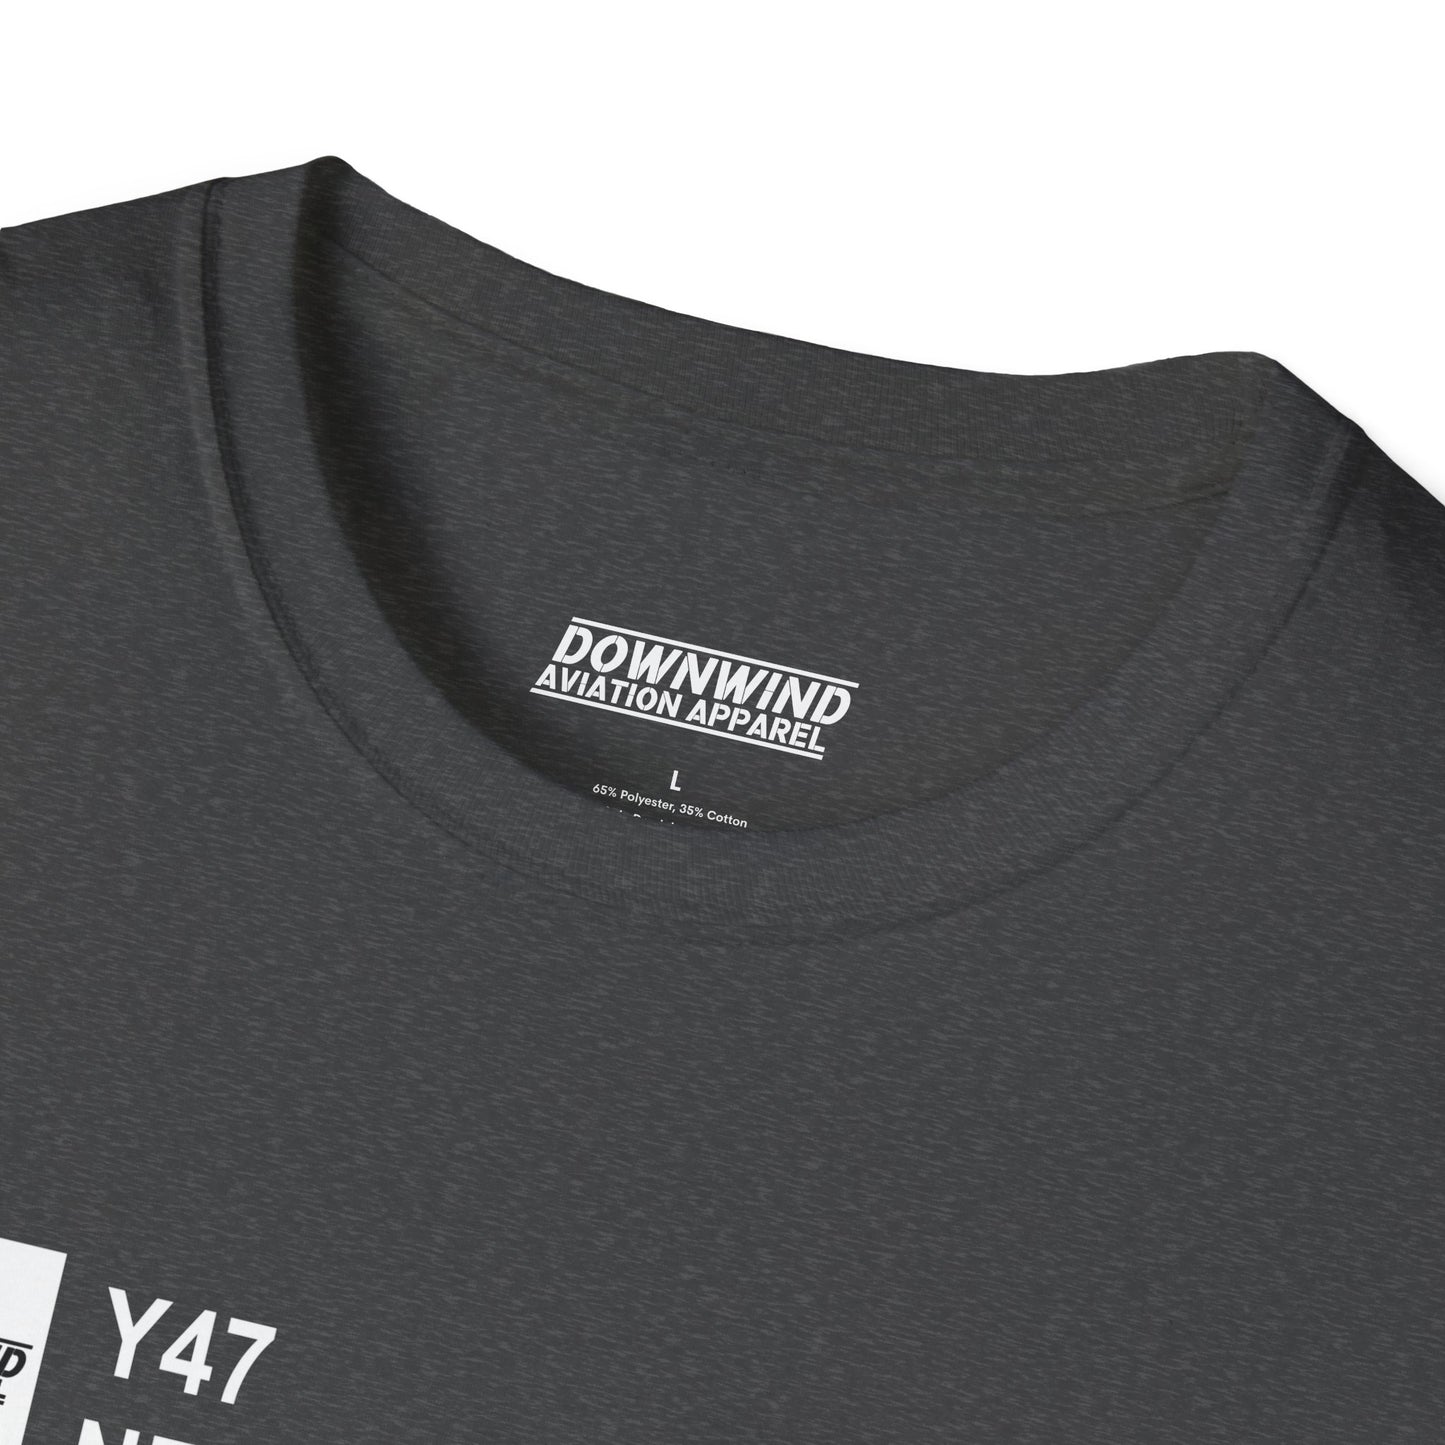 Y47 / New Hudson Airport T-Shirt